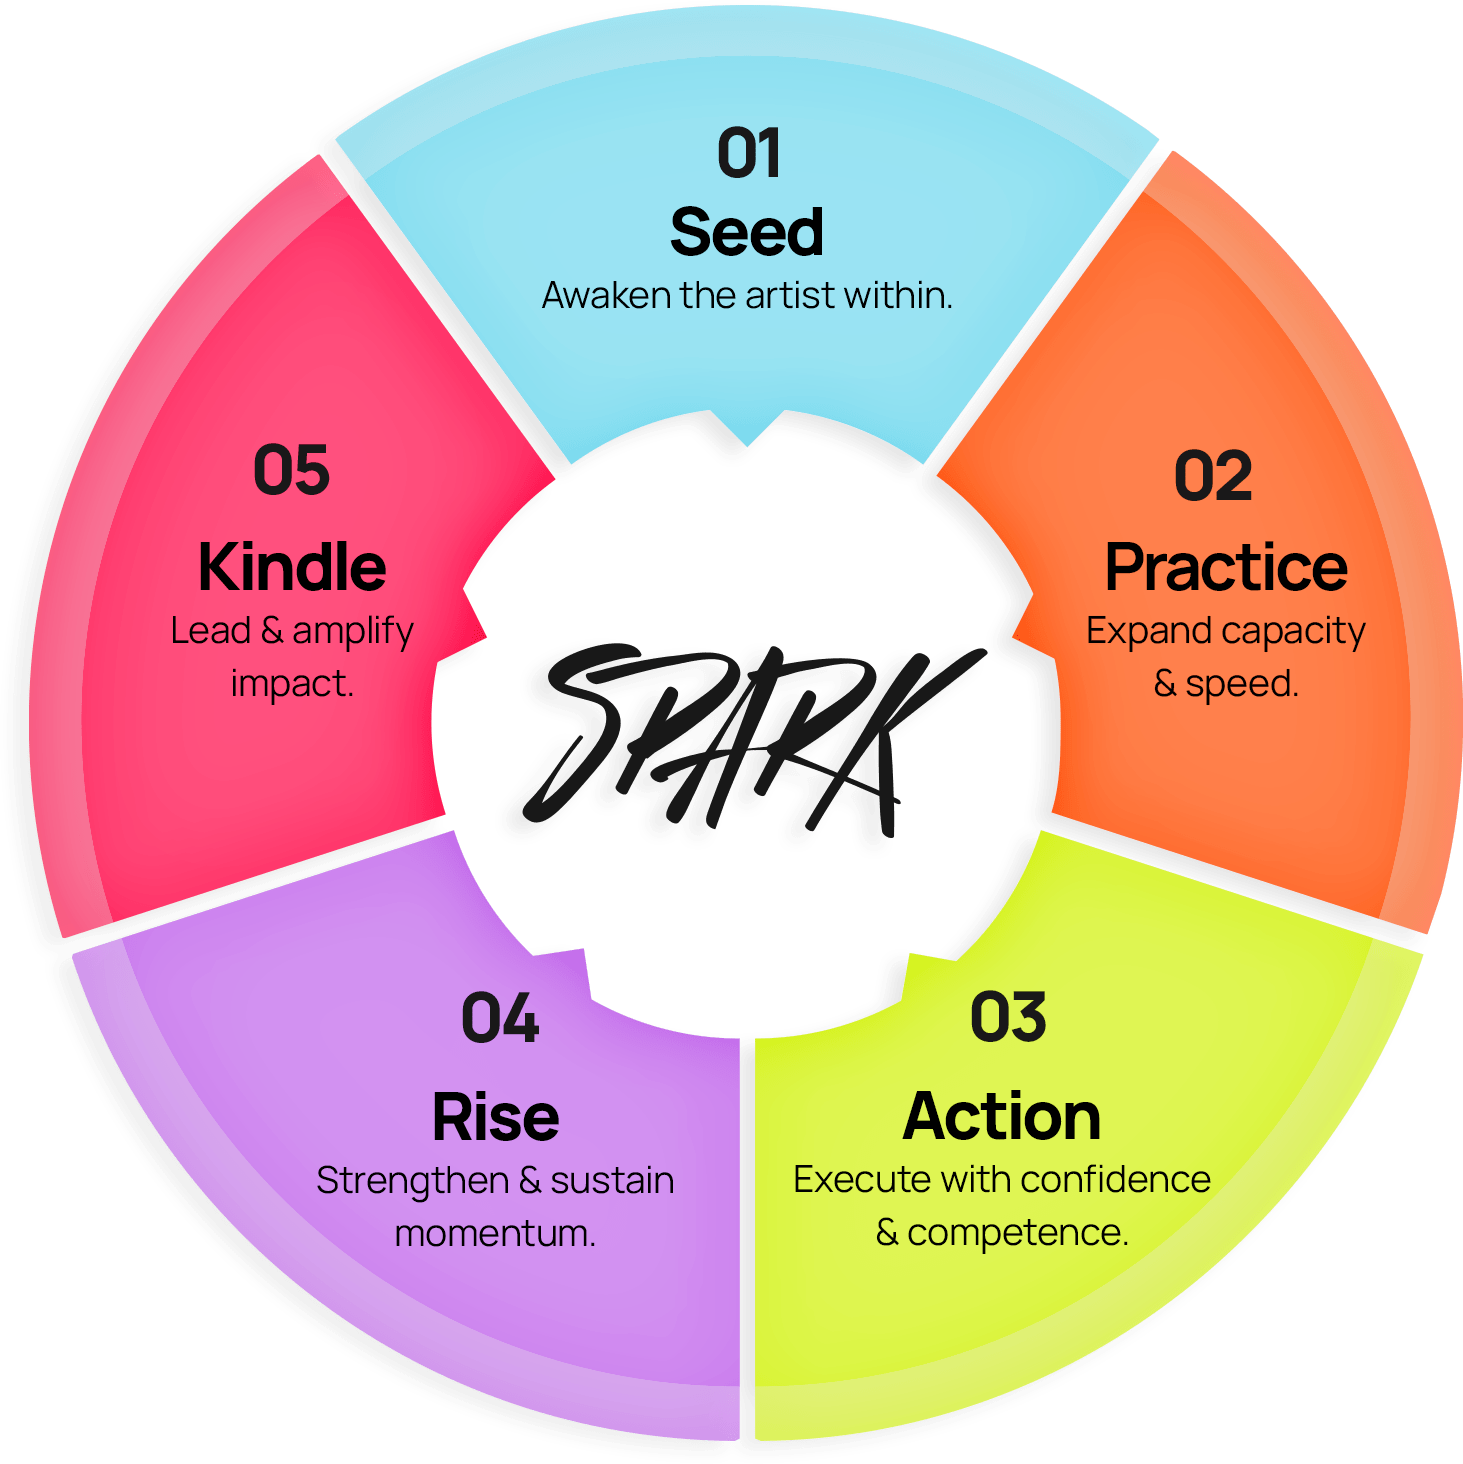 SPARK model 01 Seed - Awaken the artist within 02 Practice - Expand capacity & speed 03 Action - Execute with confidence & competence 04 Rise - Strengthen & sustain momentum 05 Kindle - Lead & amplify impact